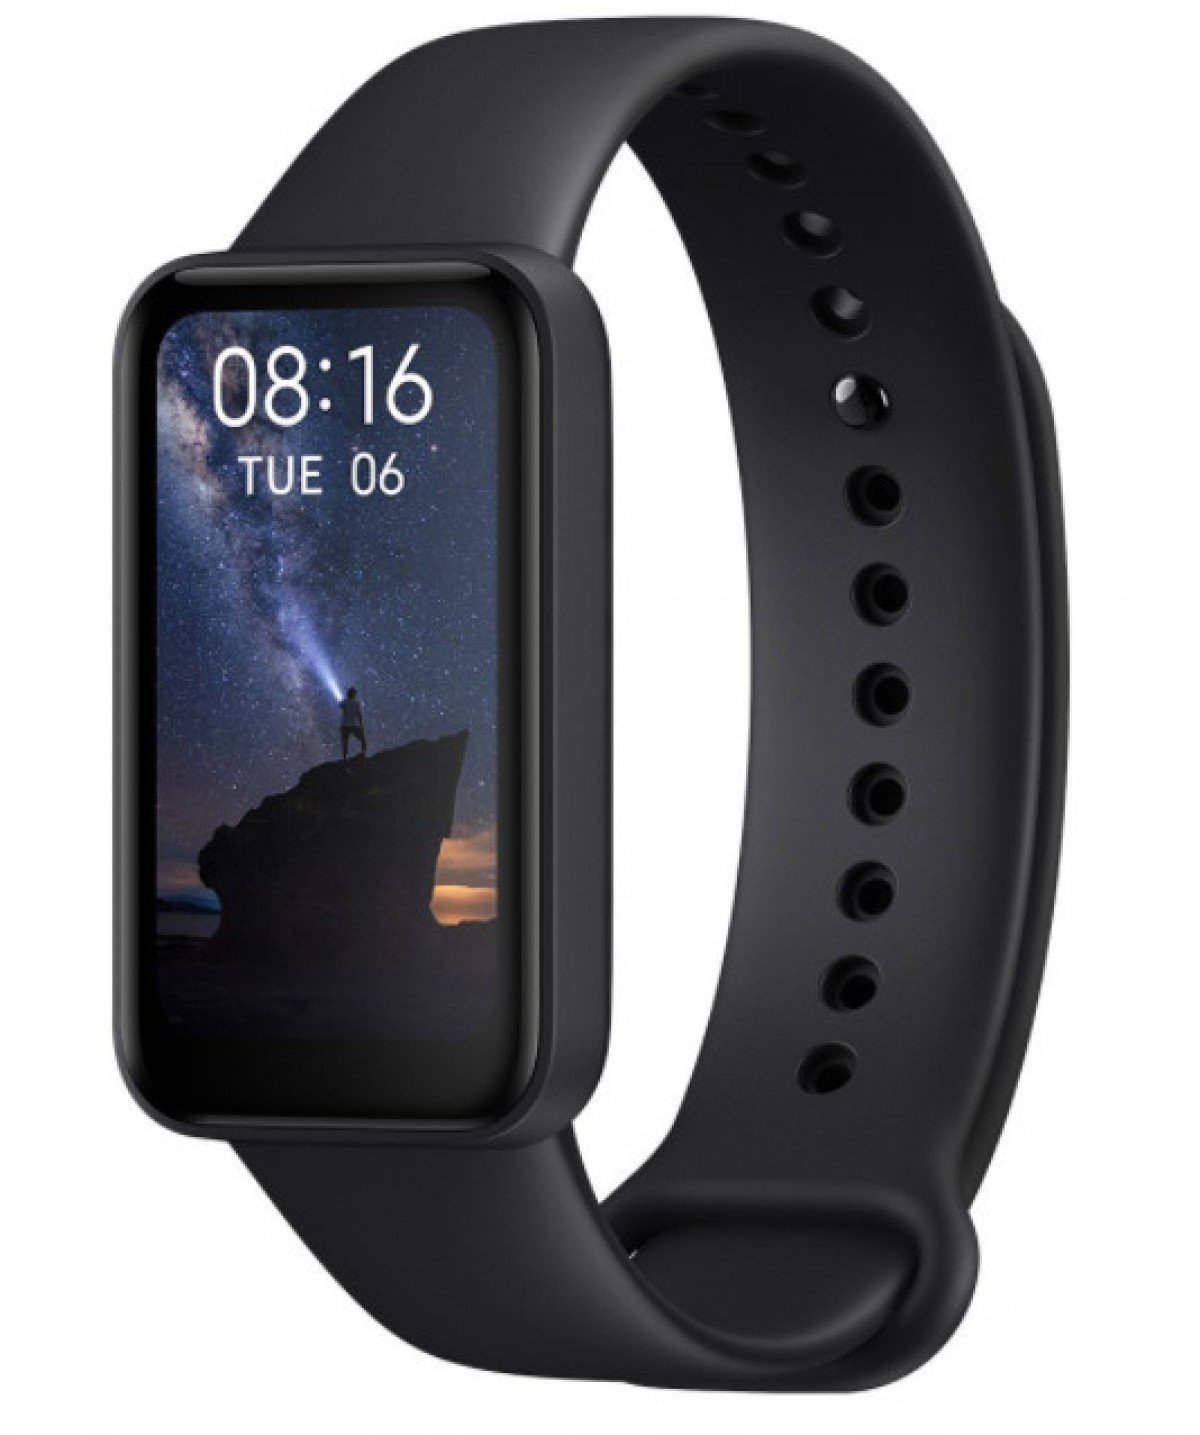 Redmi Smart Band Pro with 1.47'' OLED Display Announced